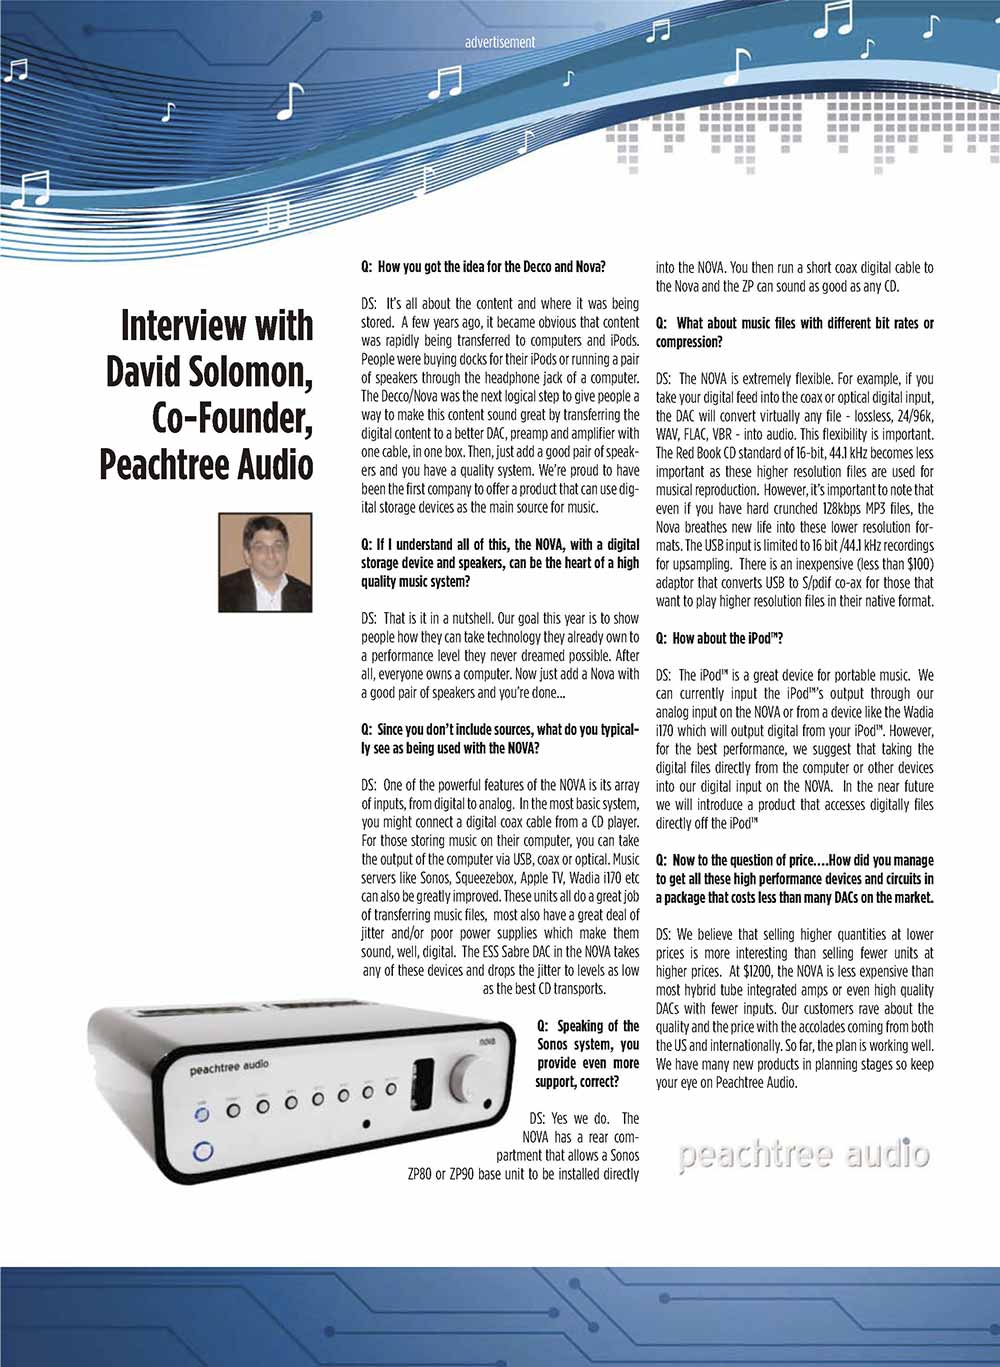 Stereophile-2009-11_Page_061.jpg